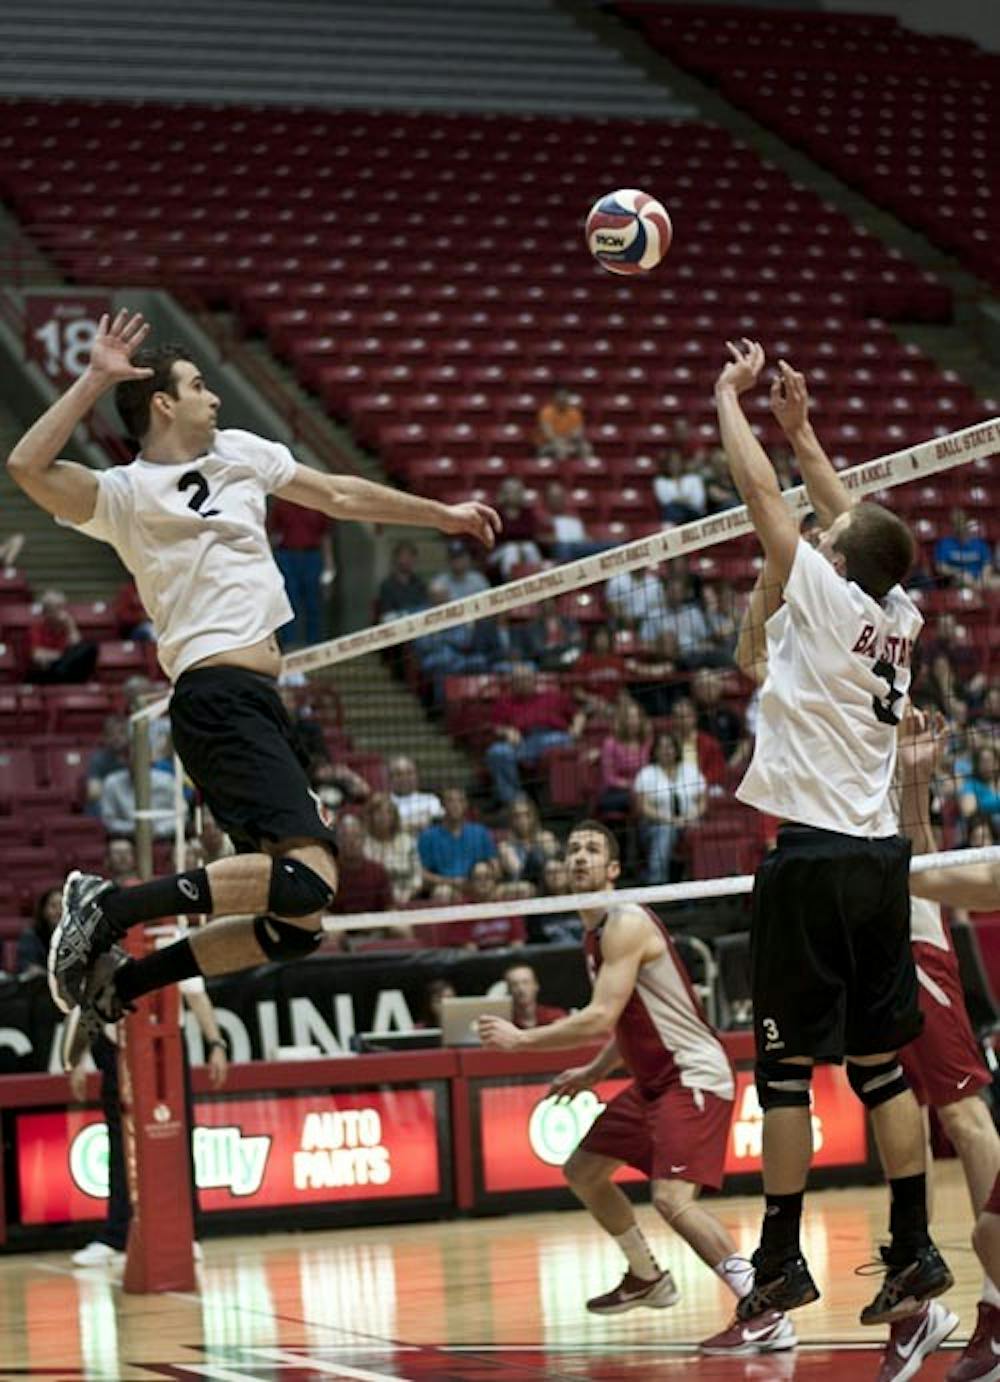 Matt Leske, left, receives the set from Dan Wichmann on March 18, 2012 during a match against Ohio State. Ball State’s men’s volleyball team will play its season opener Saturday against St. Francis. DN FILE PHOTO JONATHAN MIKSANEK